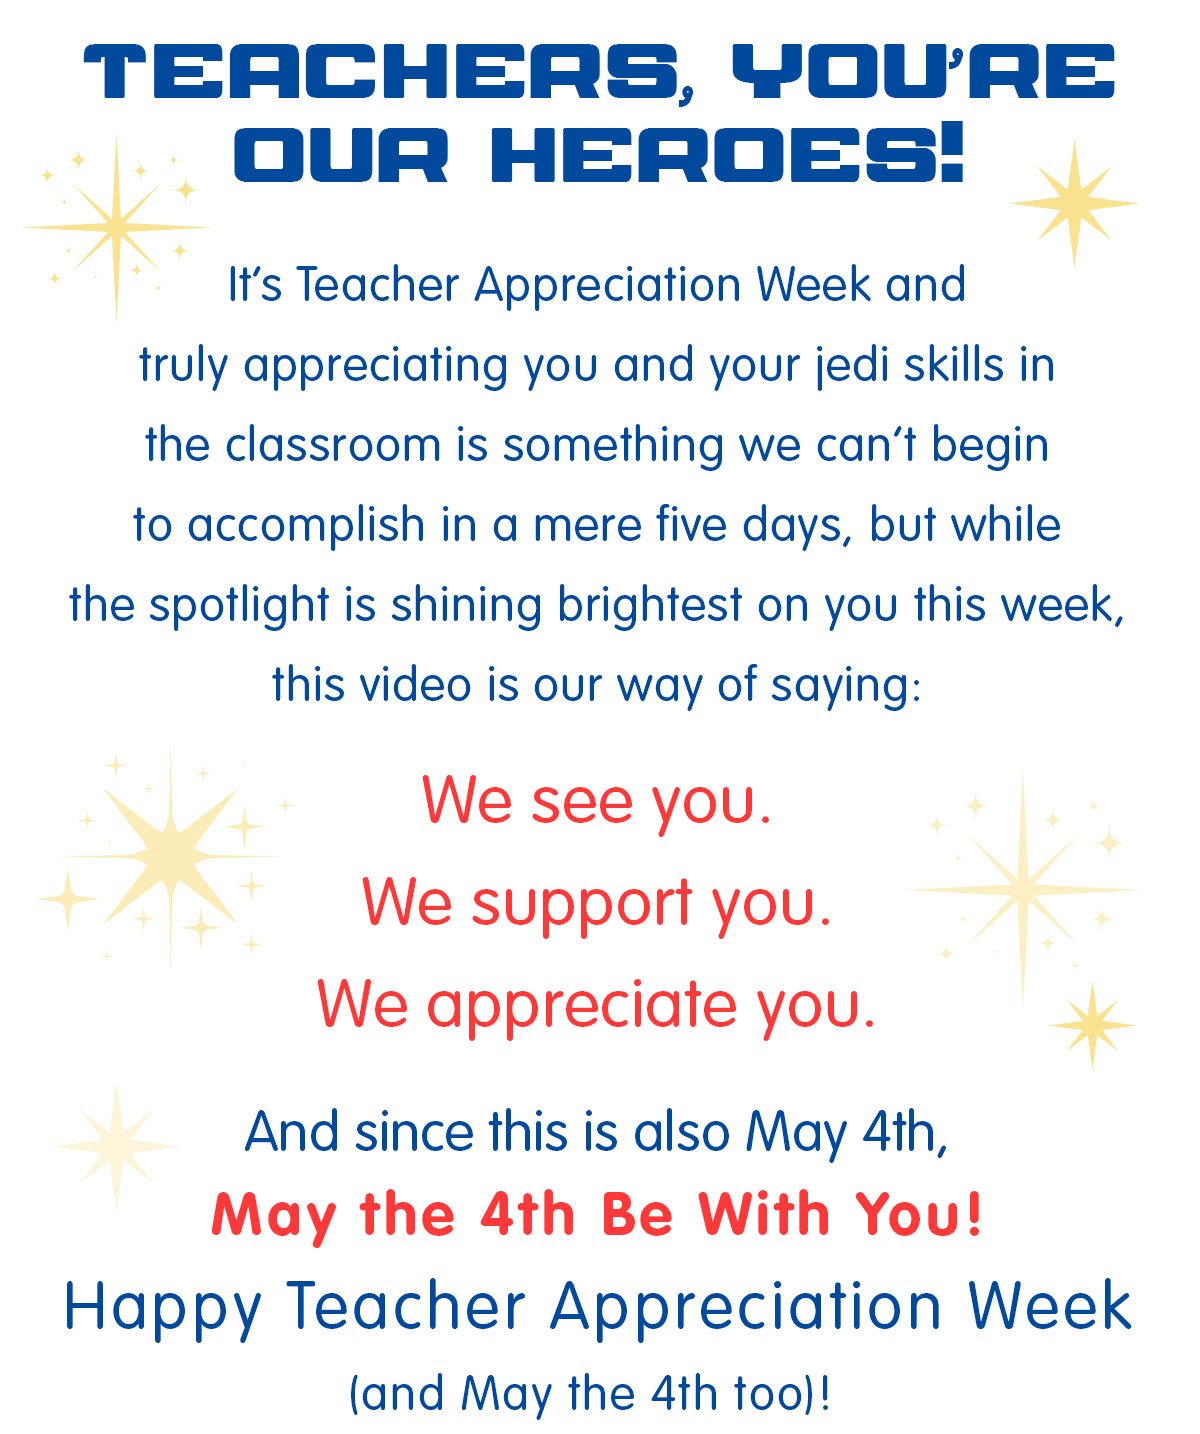 Teachers, You're Our Heroes!